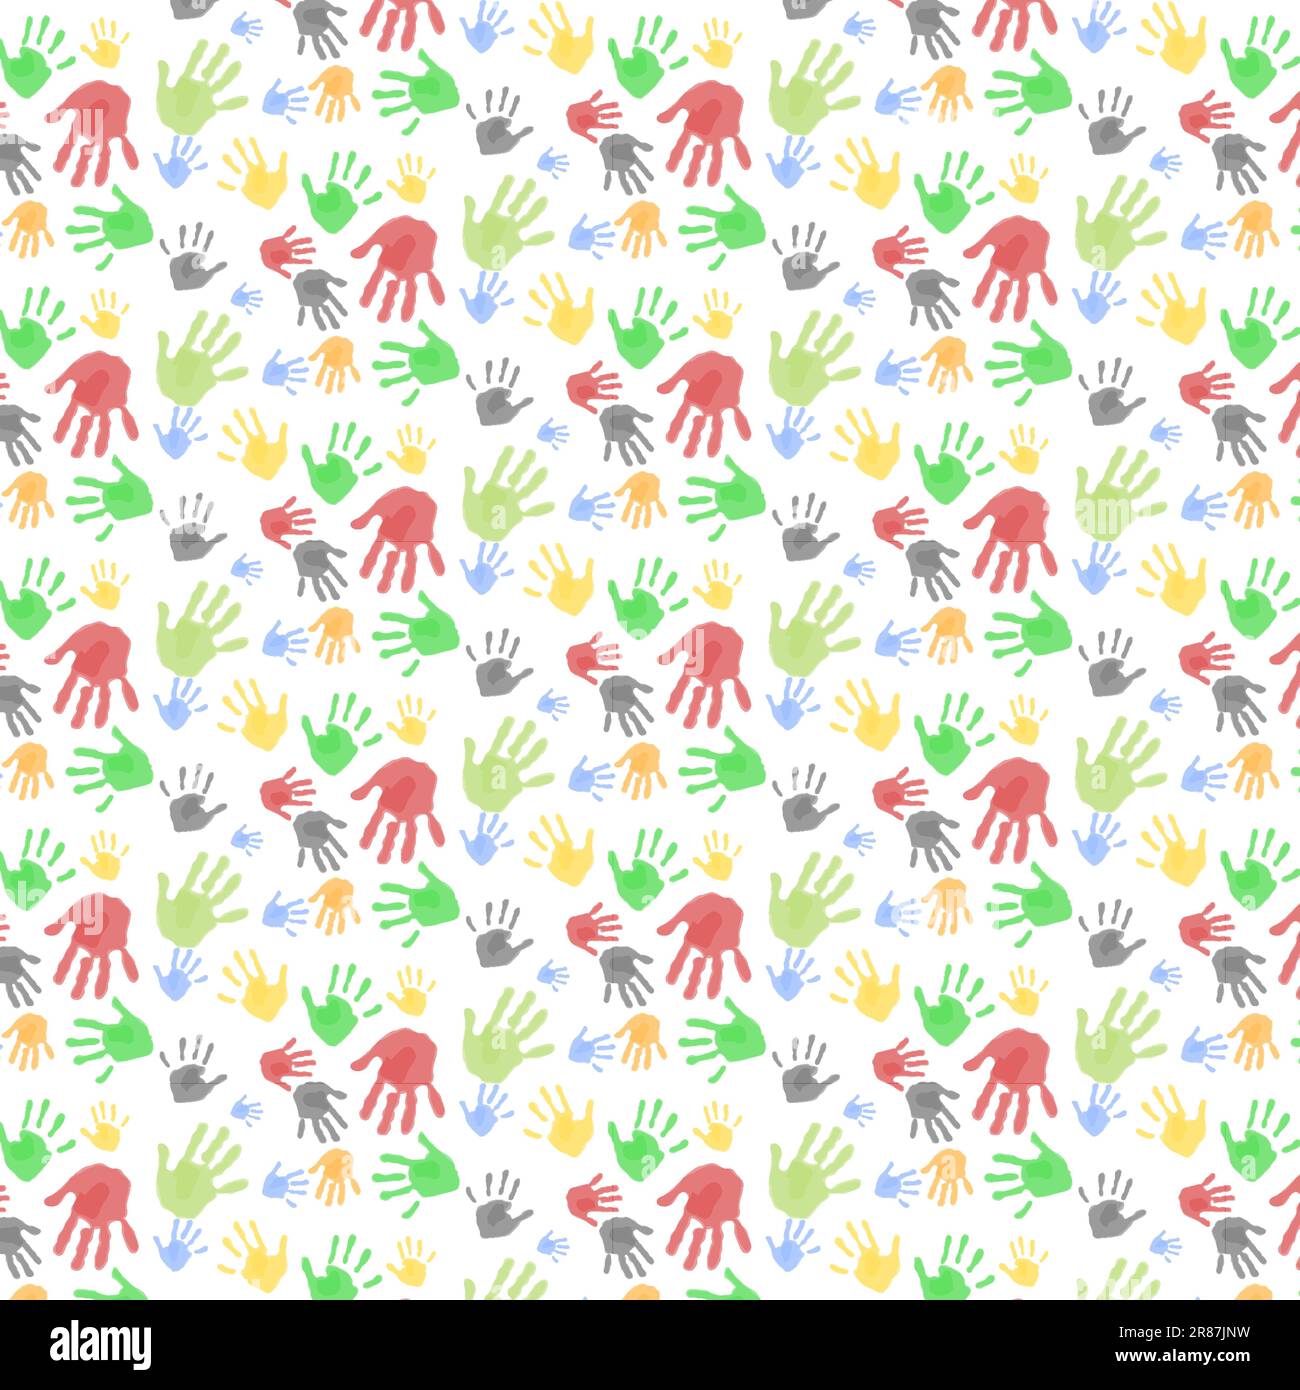 Multicolored Different Hand Prints Pattern Background Stock Vector